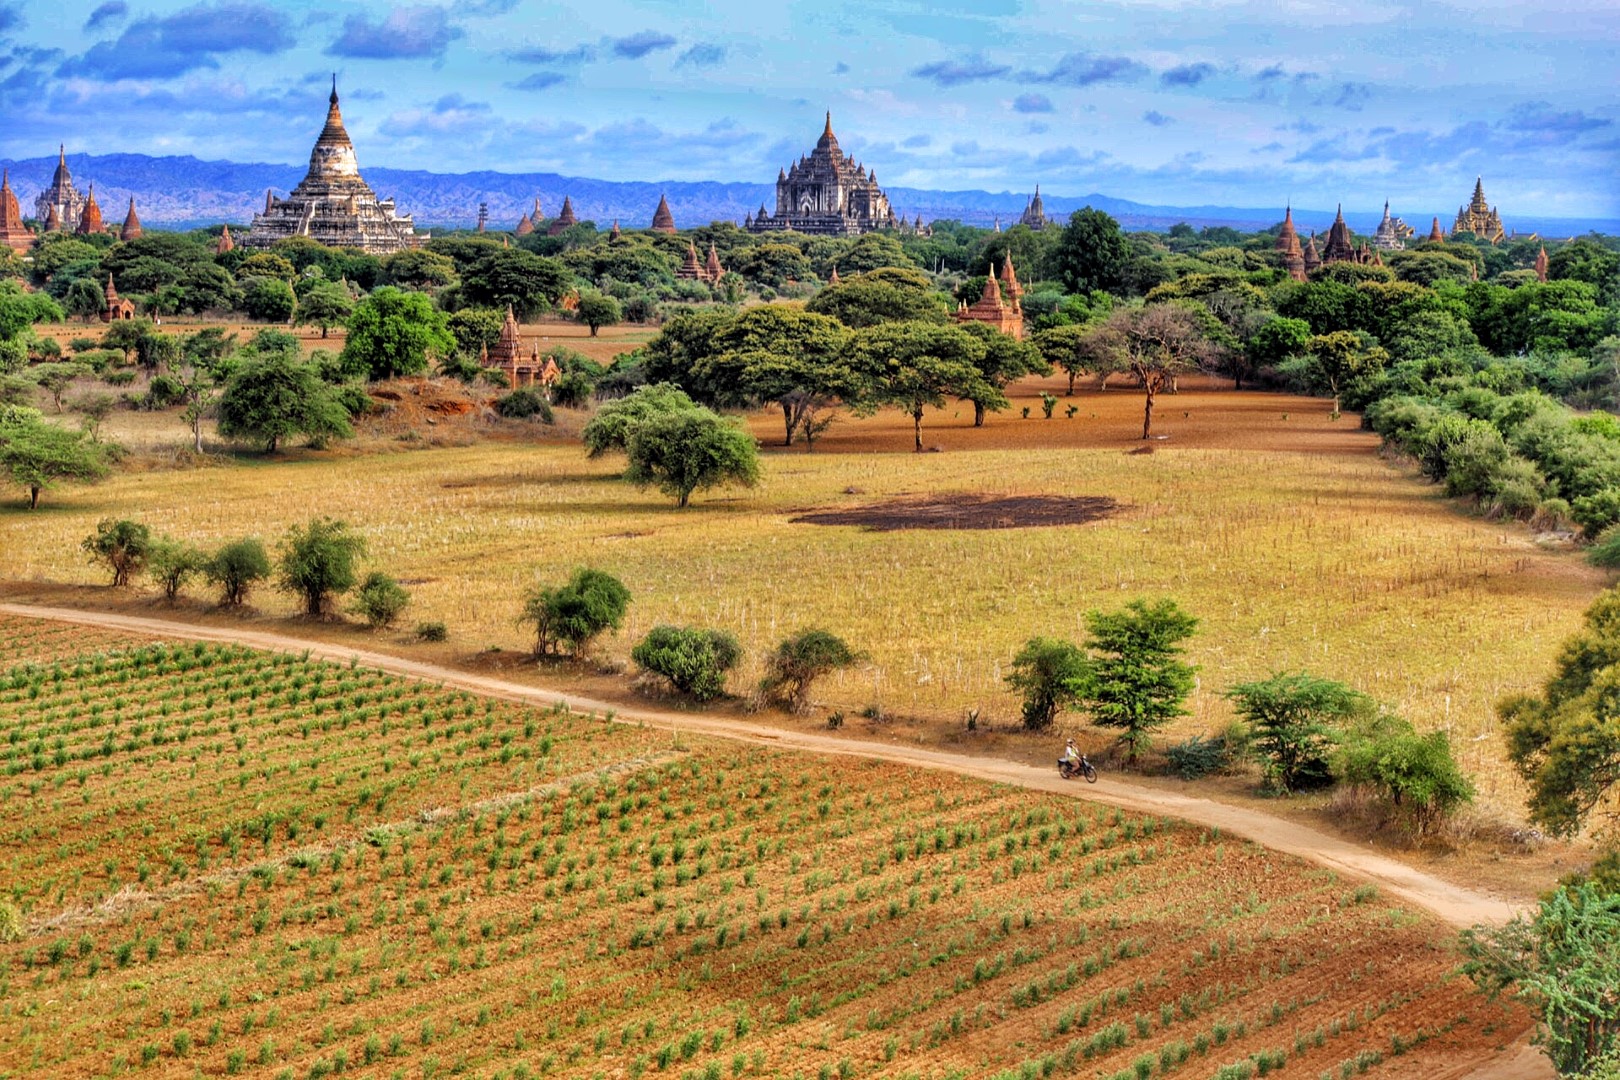 Picture Perfect Bagan by Alex Berger